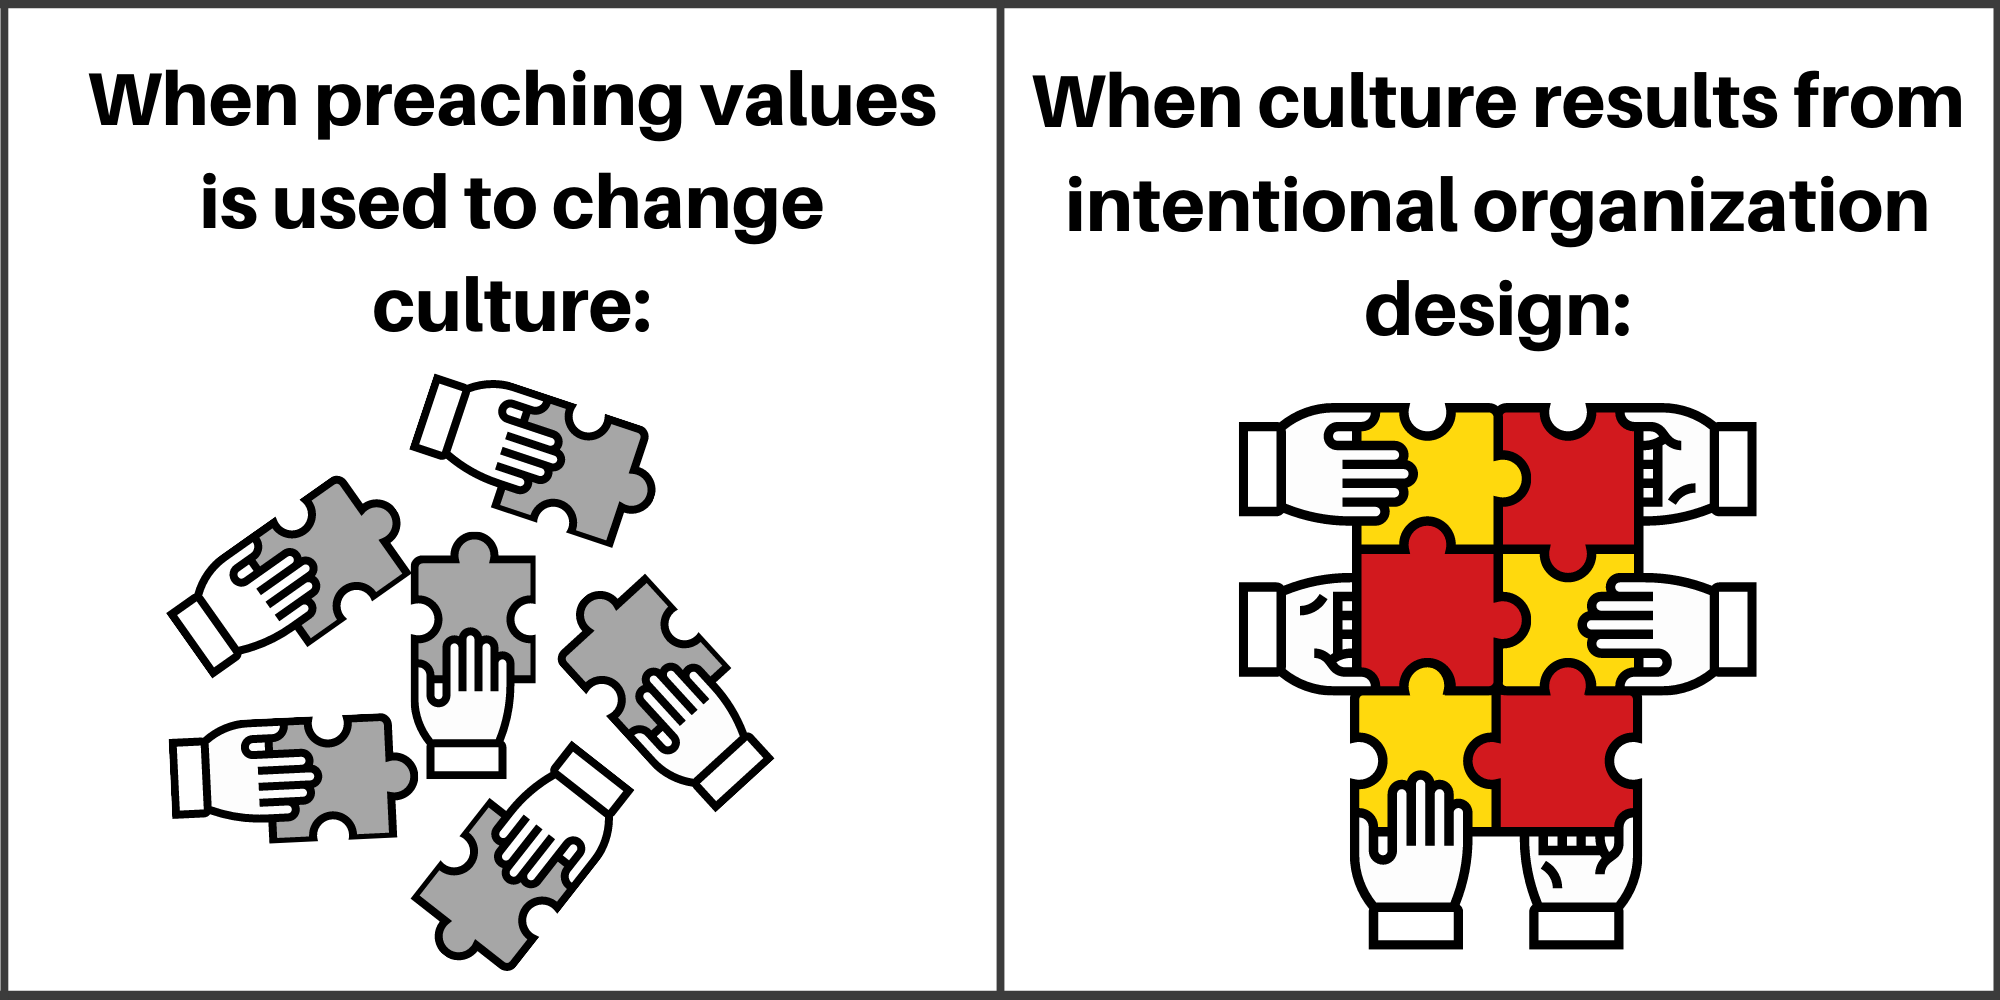 Culture as a result of intentional organization design